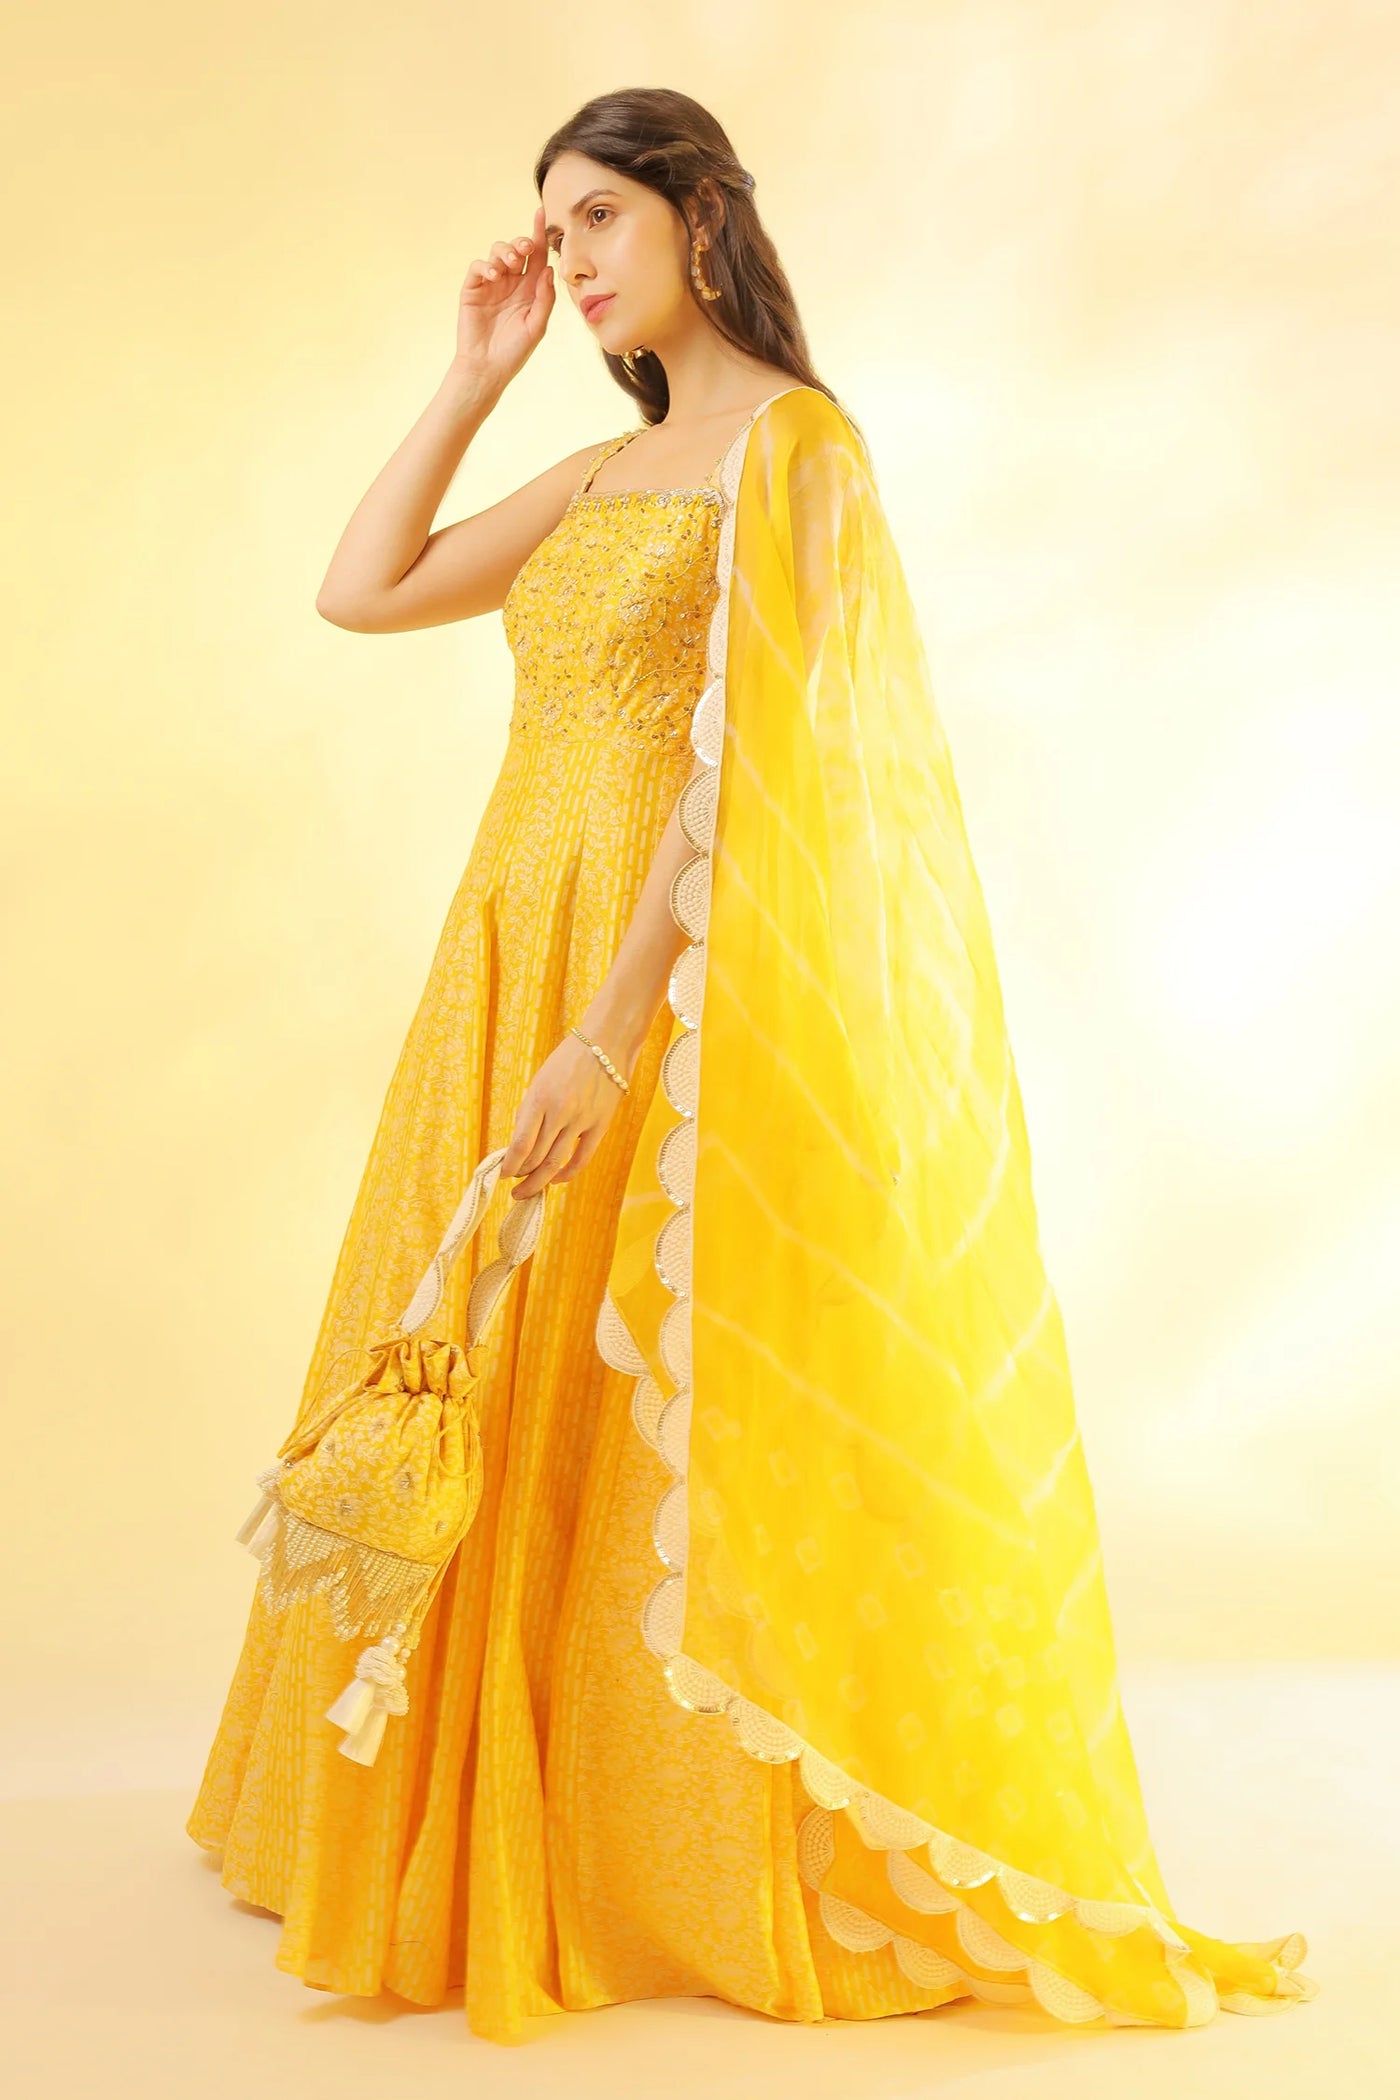 Yellow Organza Anarkali Set Indian Clothing in Denver, CO, Aurora, CO, Boulder, CO, Fort Collins, CO, Colorado Springs, CO, Parker, CO, Highlands Ranch, CO, Cherry Creek, CO, Centennial, CO, and Longmont, CO. NATIONWIDE SHIPPING USA- India Fashion X